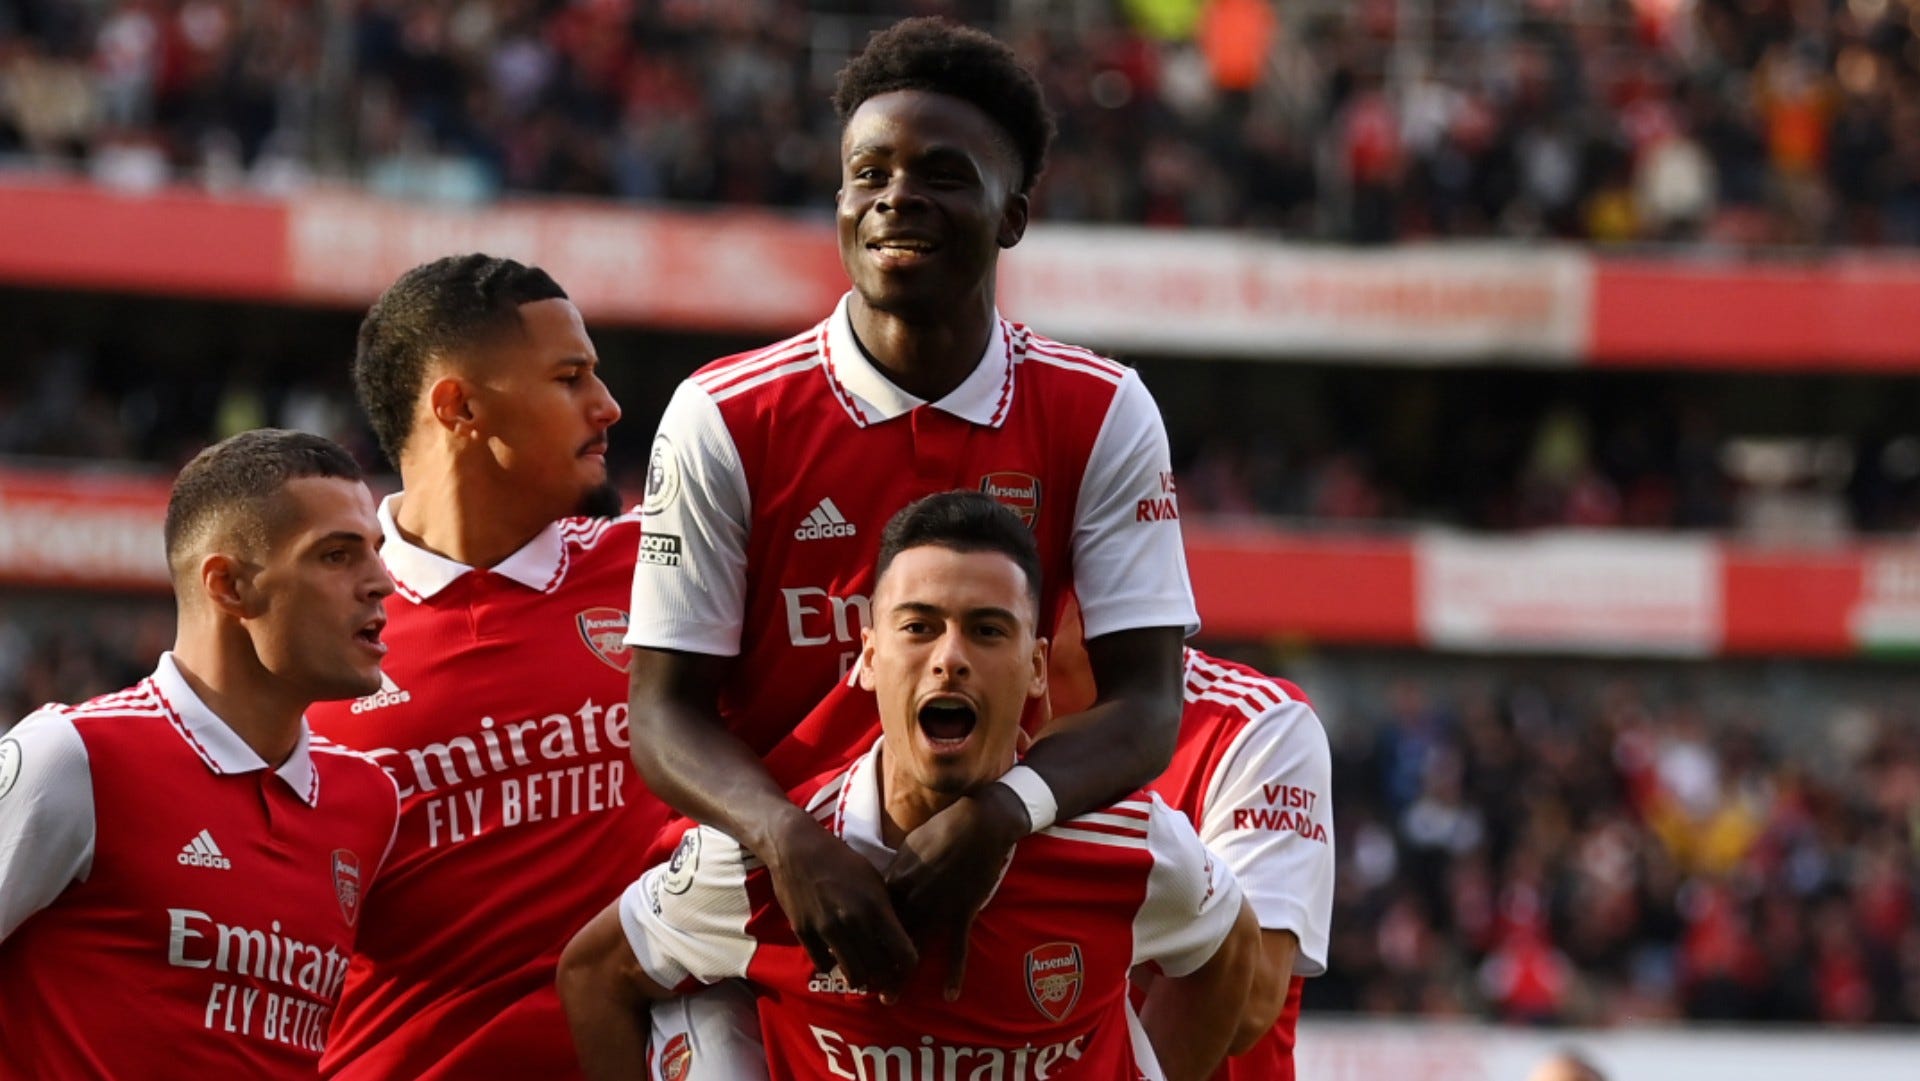 Bodo/Glimt vs Arsenal Live stream, TV channel, kick-off time and where to watch Goal US